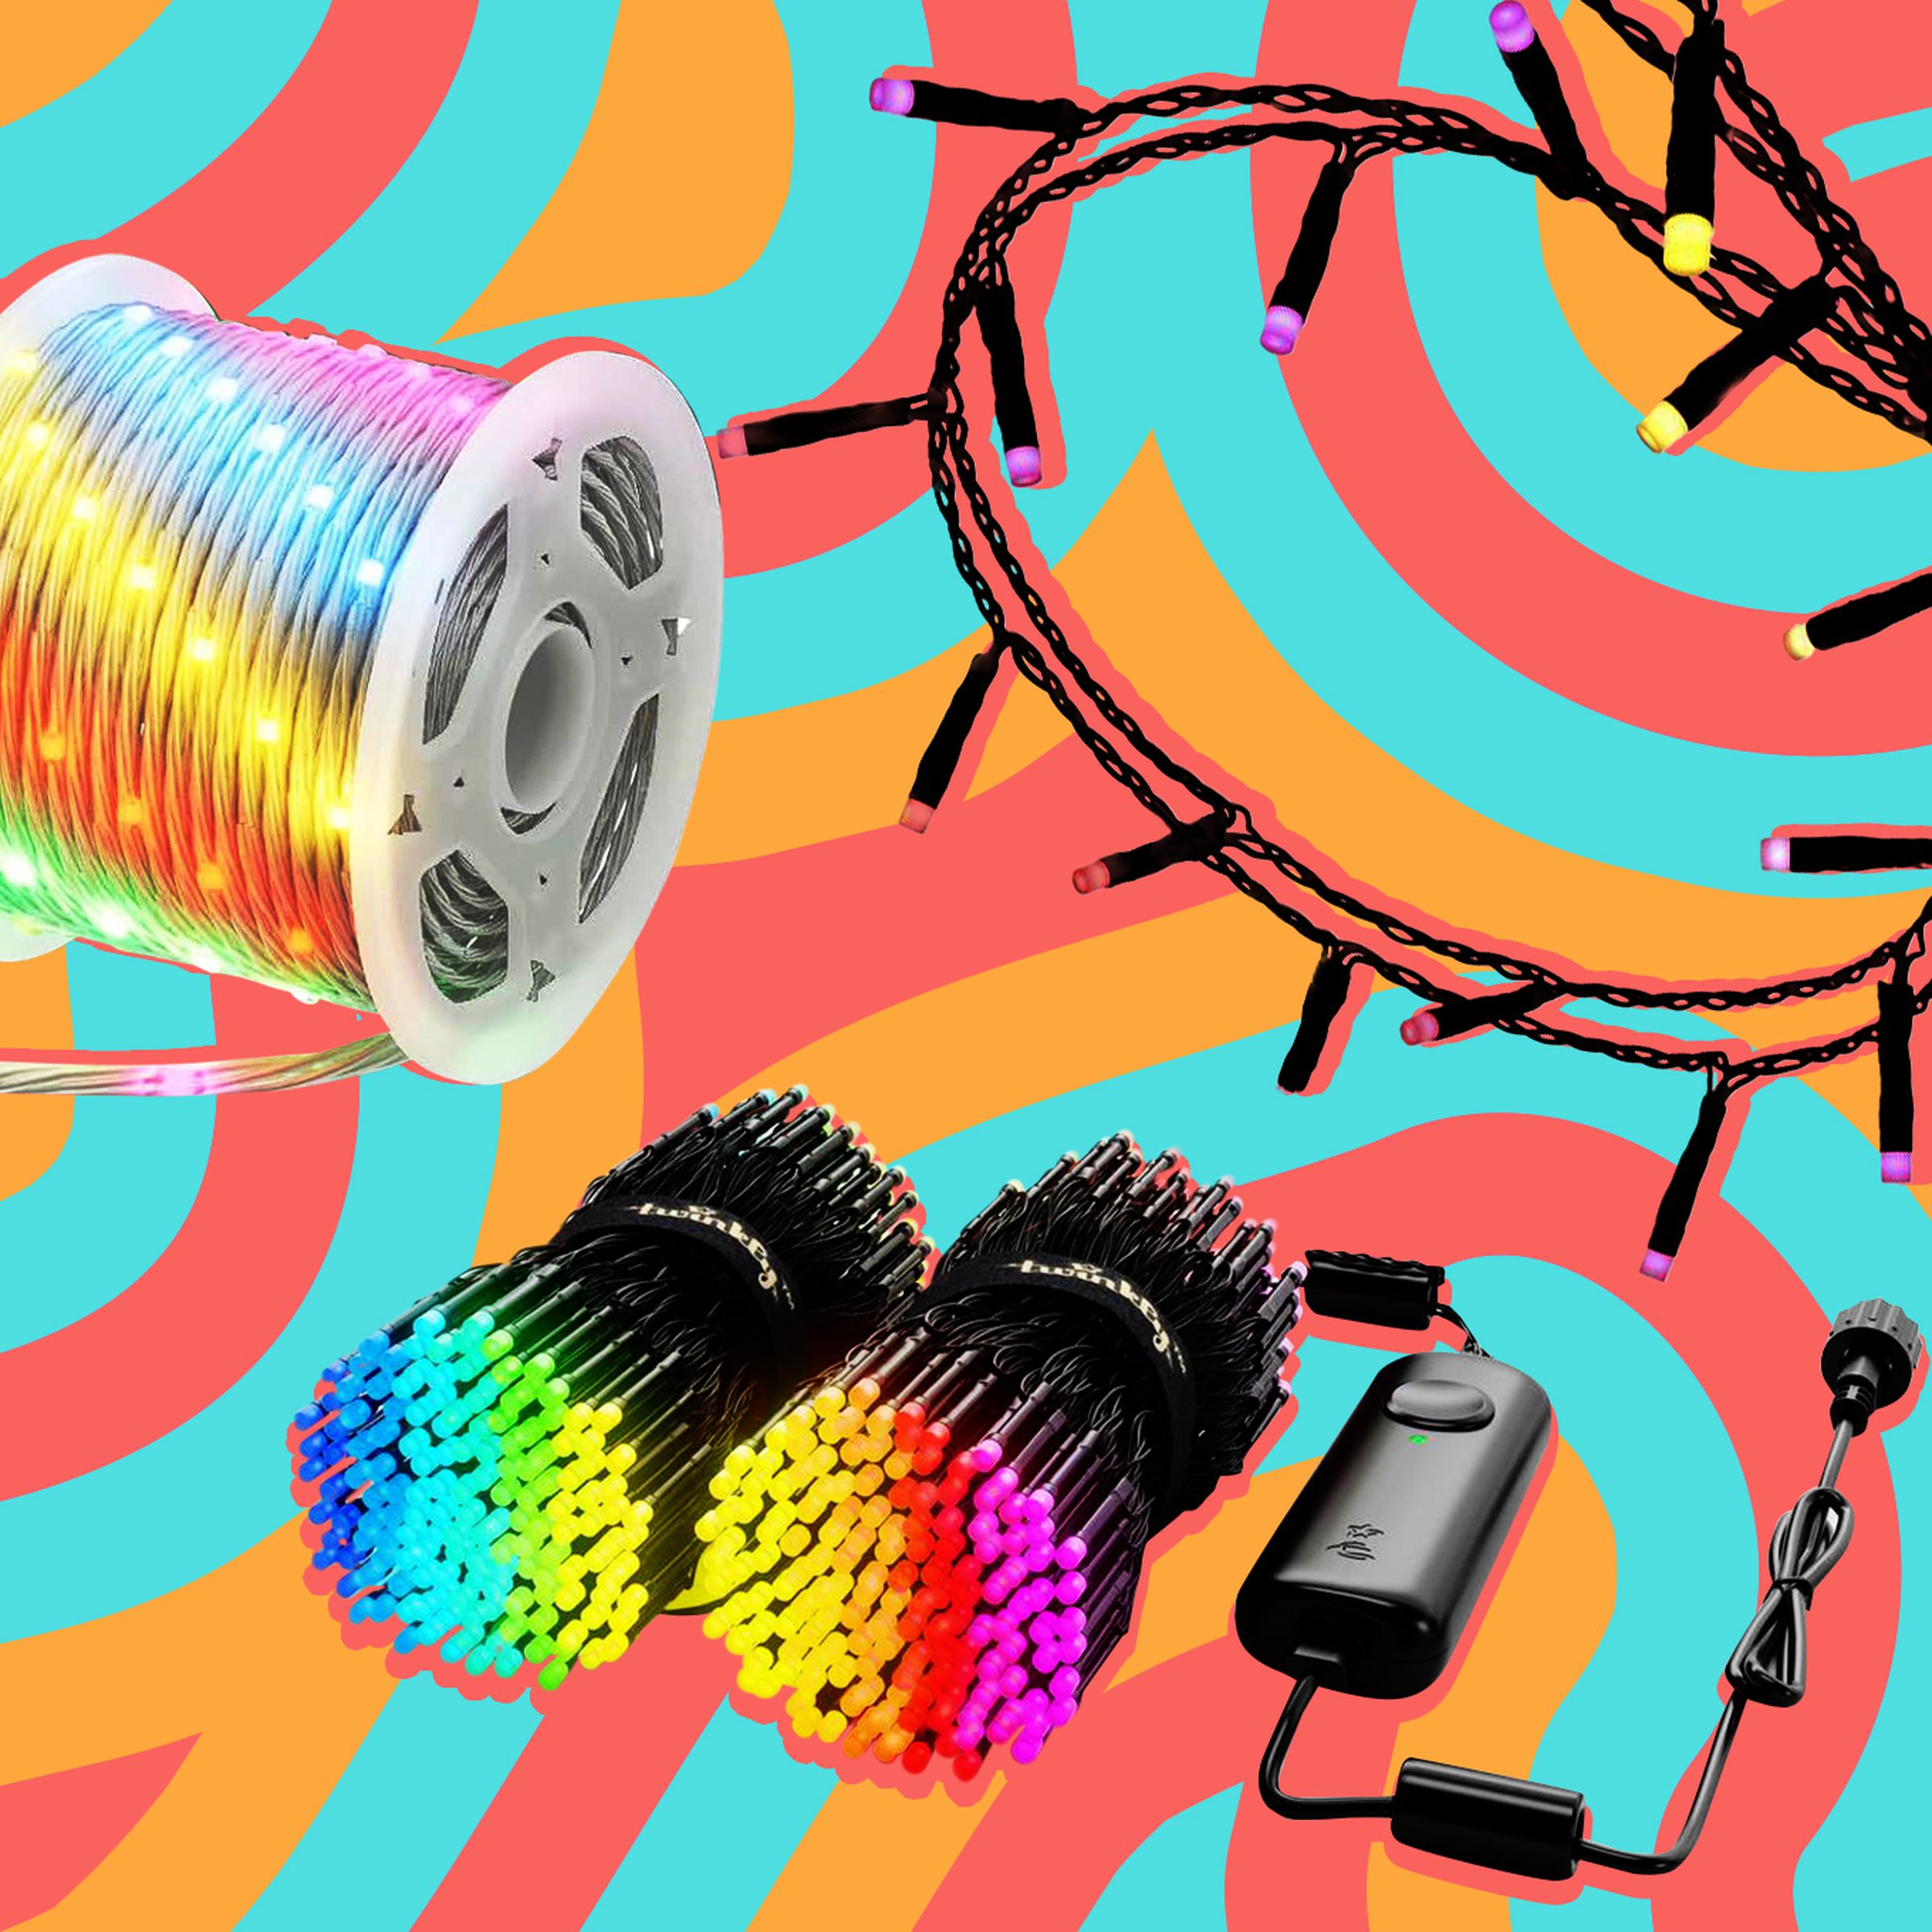 Photo illustration of a variety of string lights on a graphic swirly background